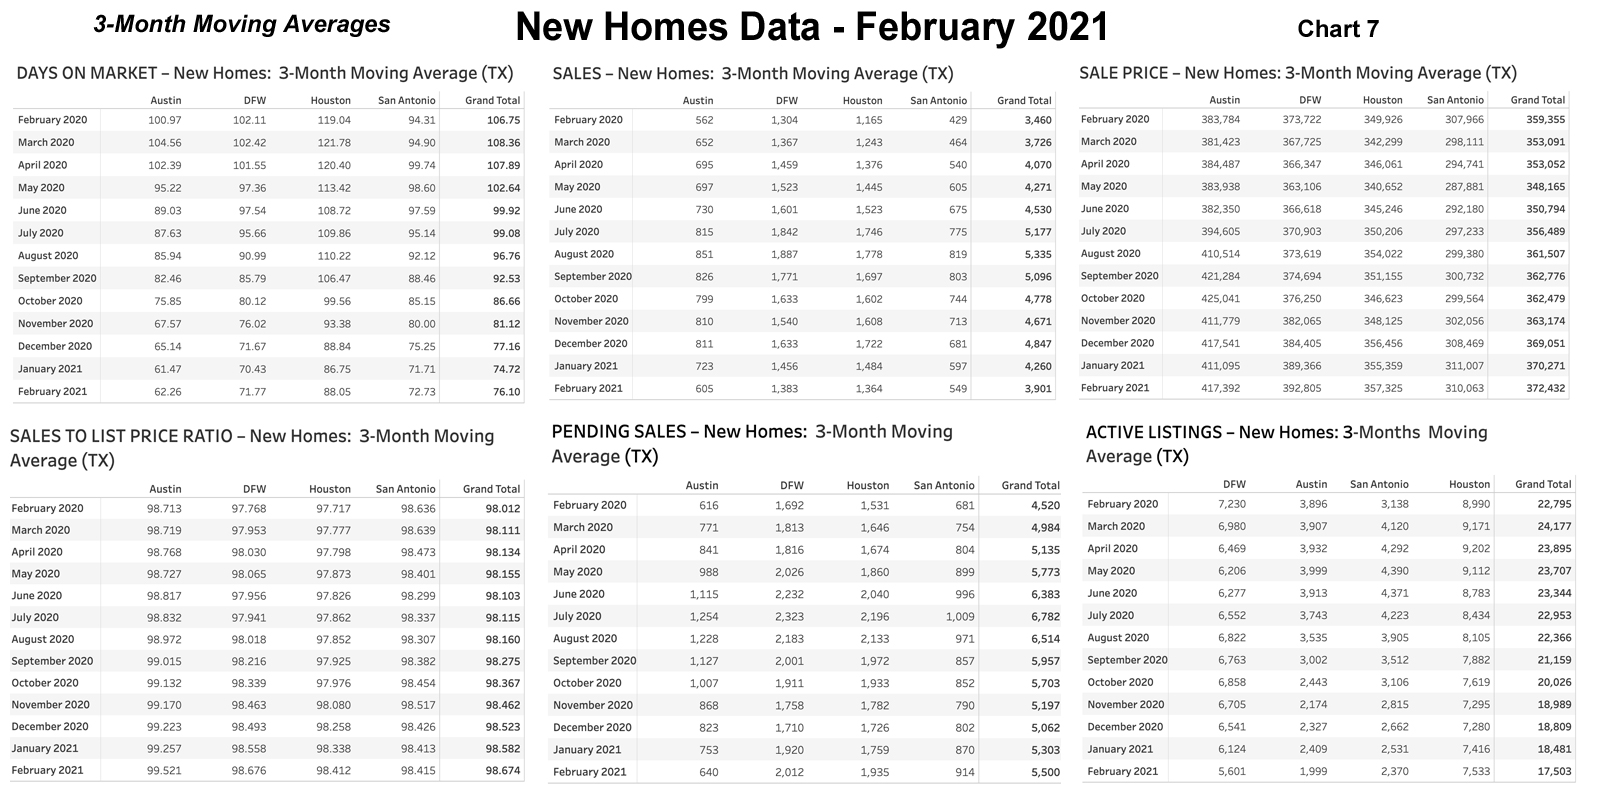 Chart 7: Texas 3-Month Moving Averages – New Homes - February 2021